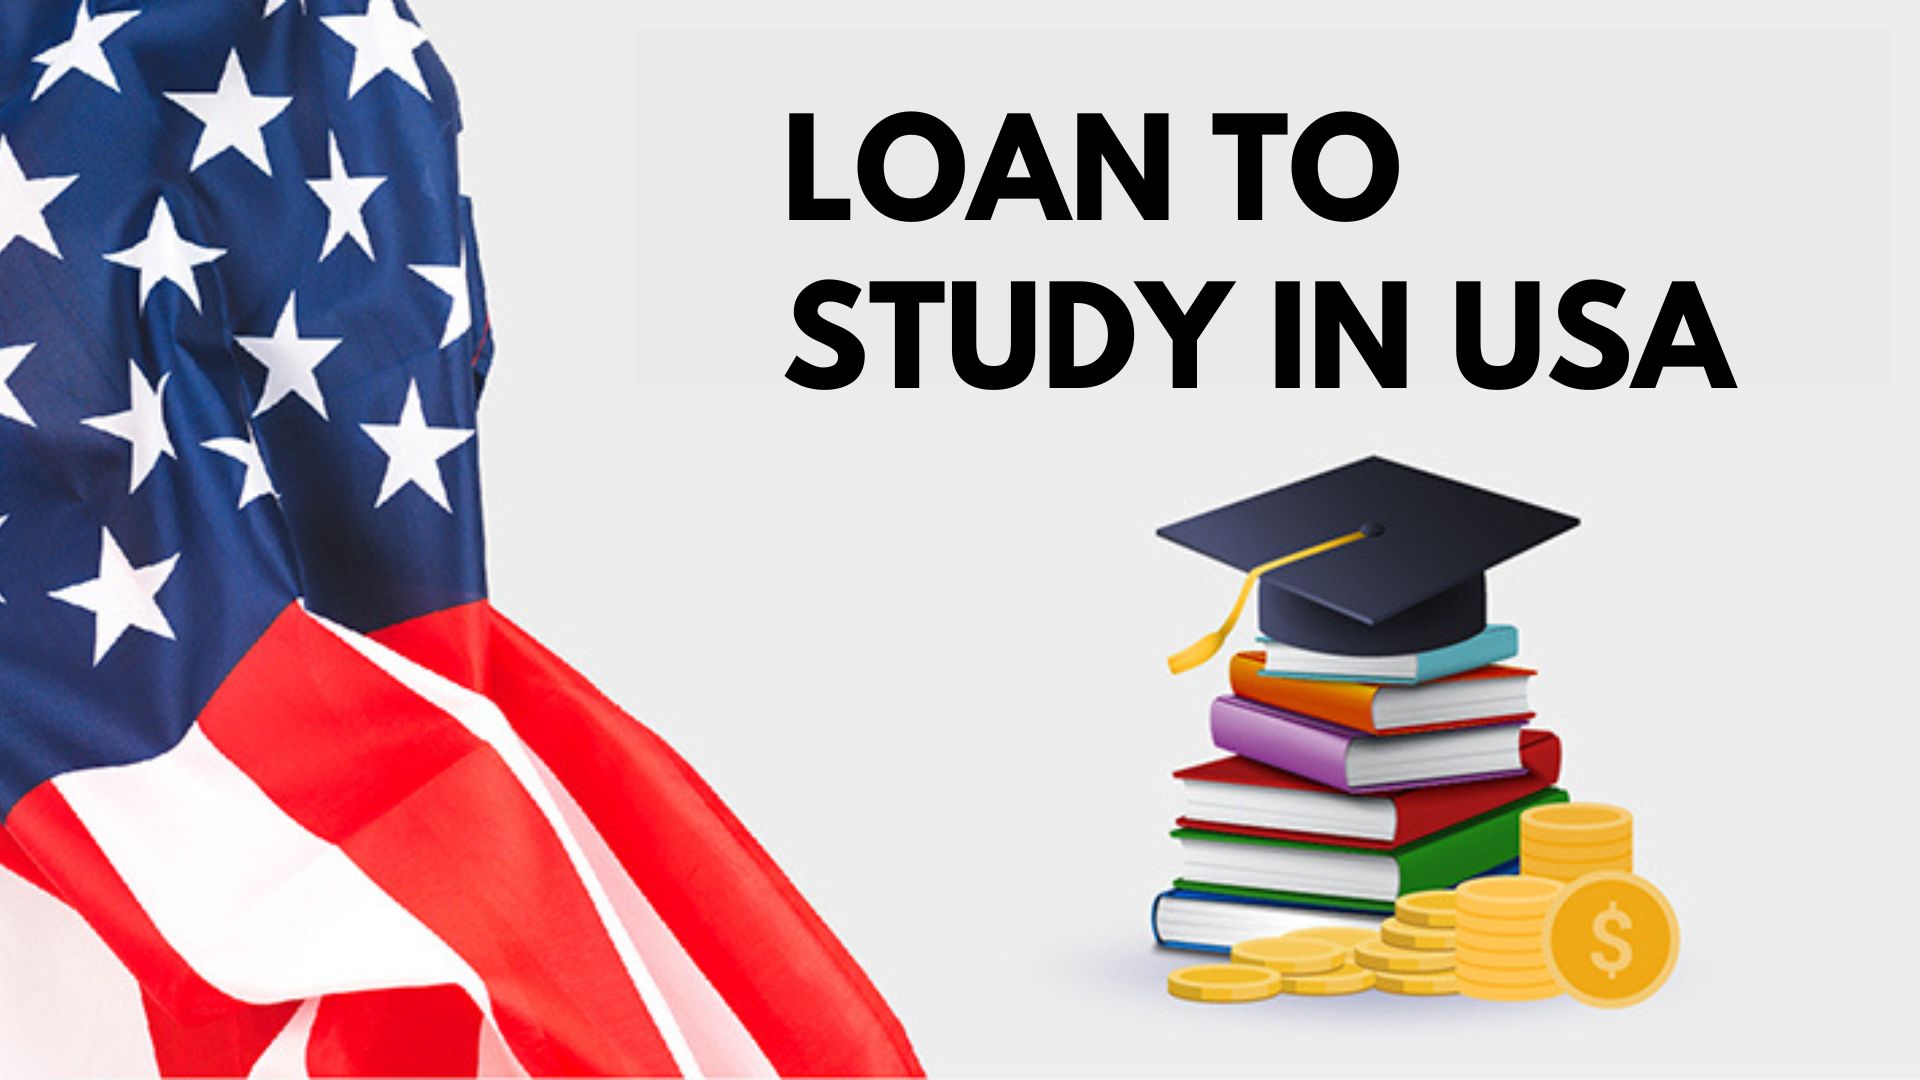 Education Loan to Study in the USA: A Guide